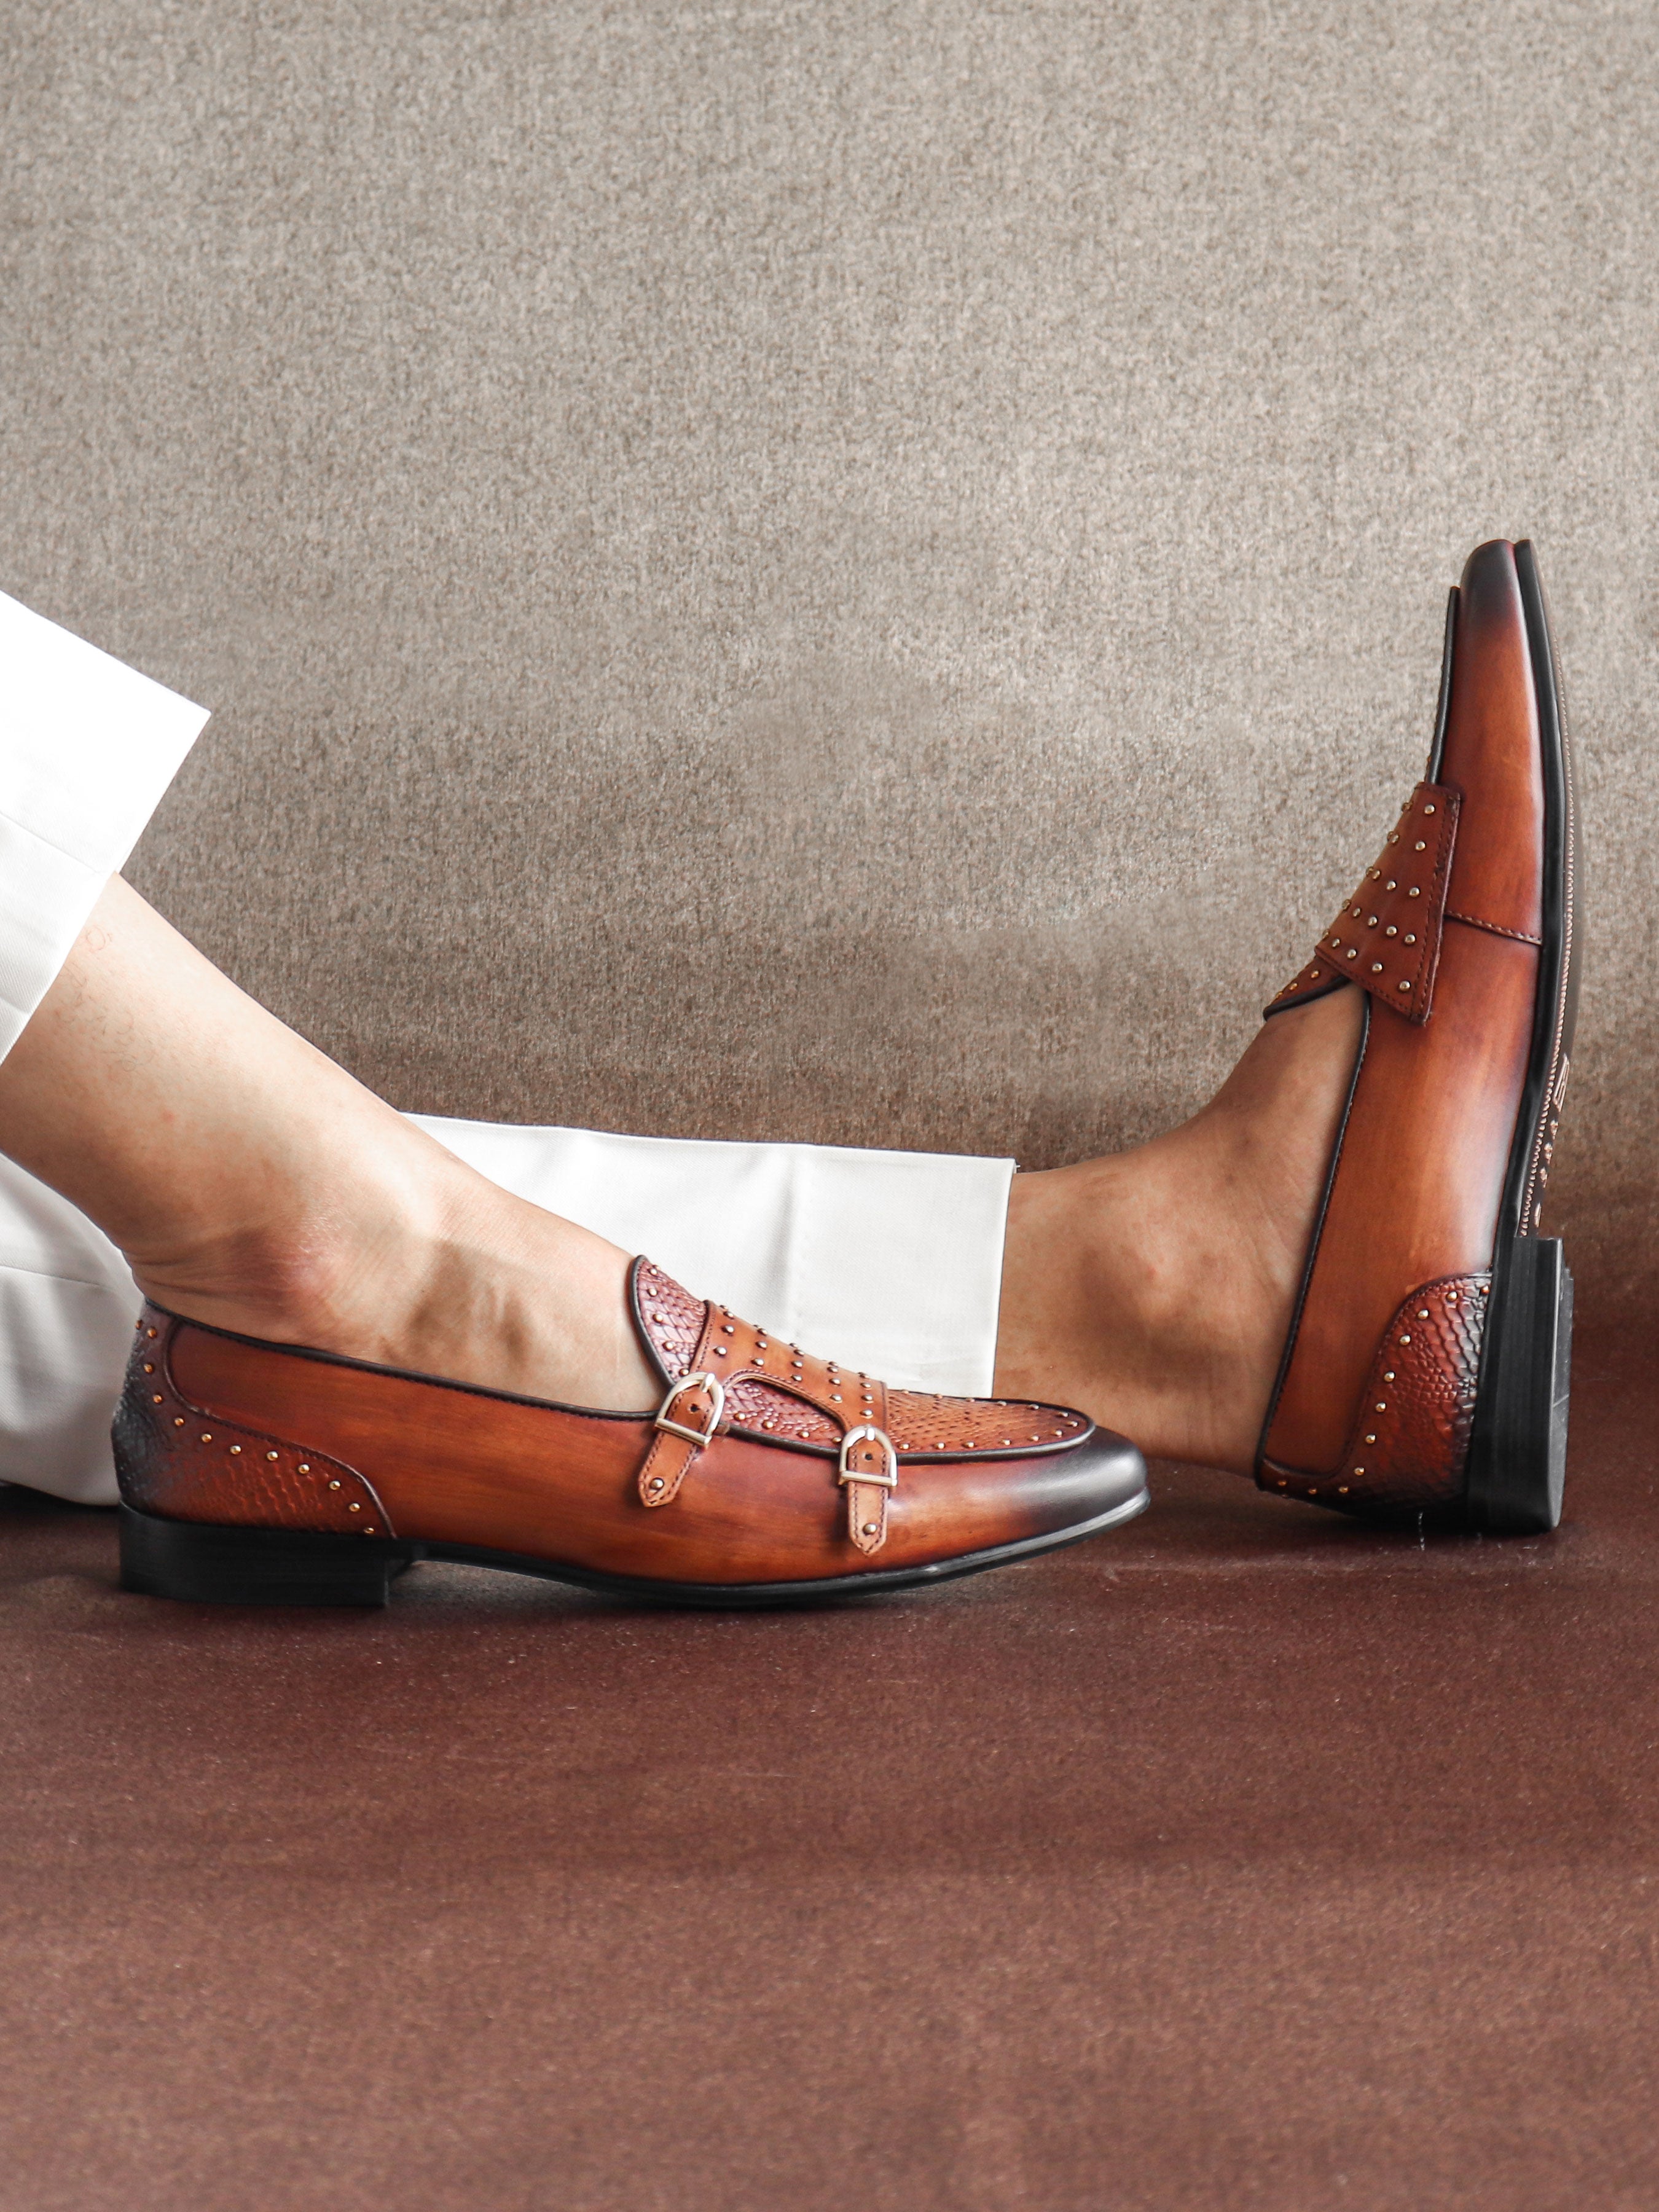 Belgian Loafer - Cognac Tan Snake Skin Double Monk Strap with Studded (Hand Painted Patina) - Zeve Shoes